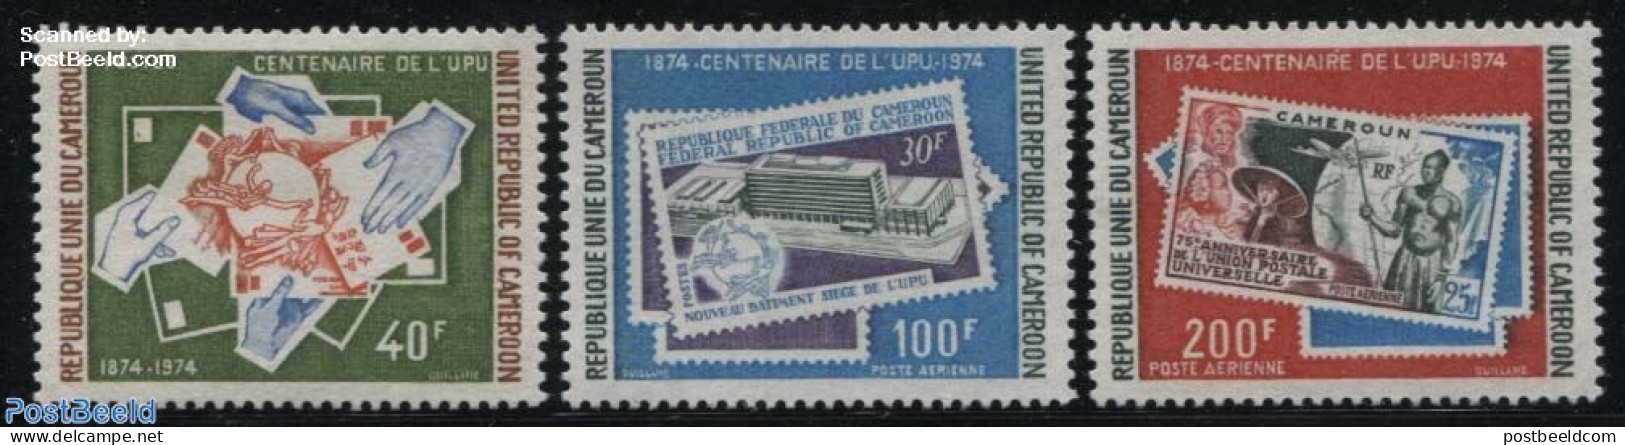 Cameroon 1974 U.P.U. Centenary 3v, Mint NH, Stamps On Stamps - U.P.U. - Art - Modern Architecture - Stamps On Stamps